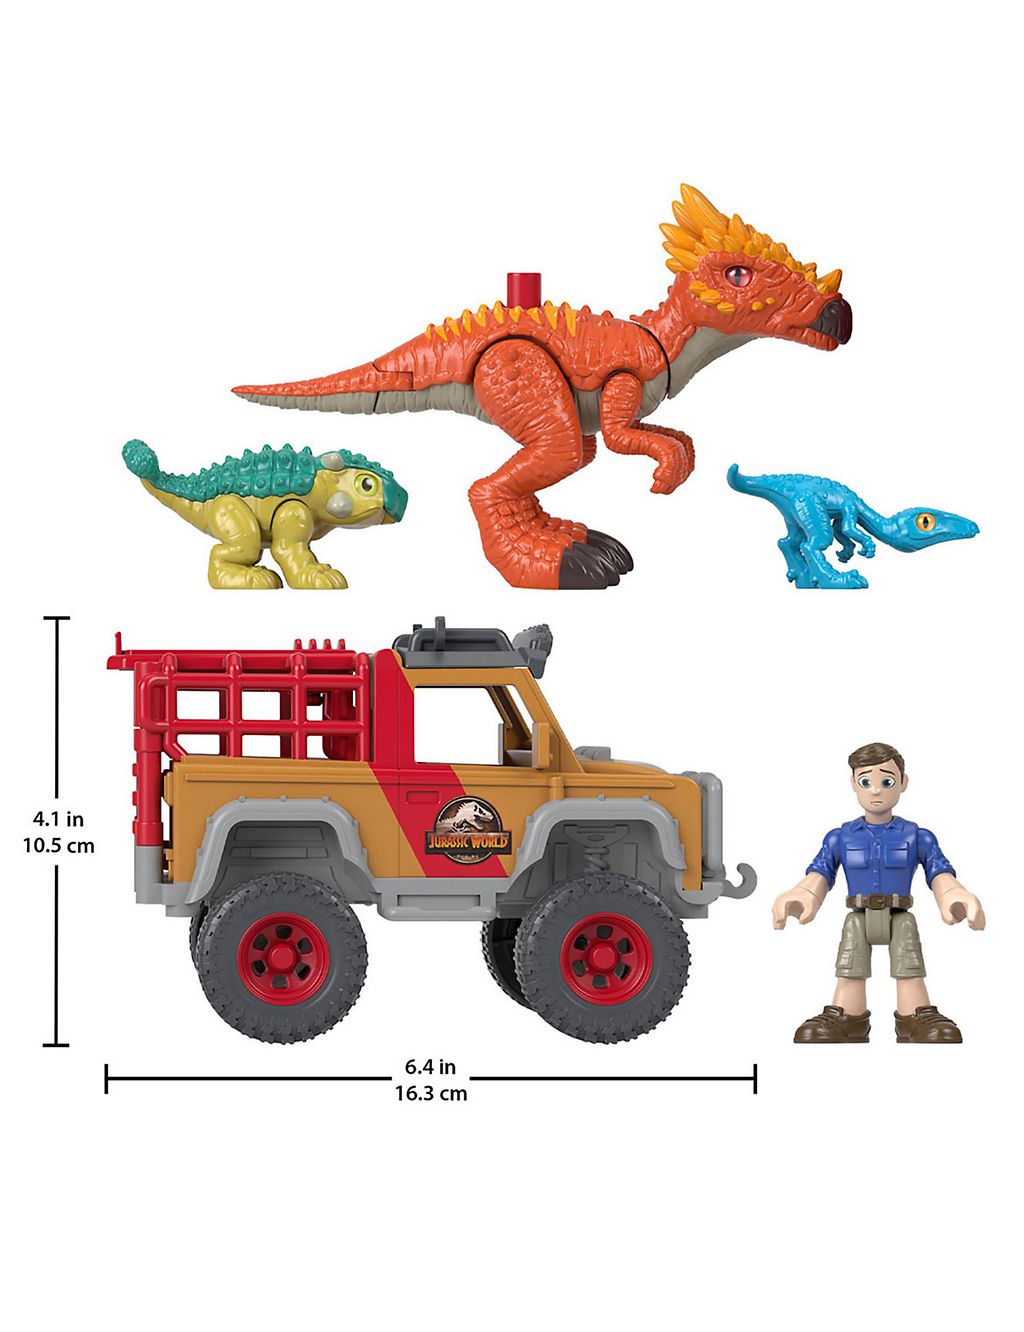 Imaginext: Jurassic World - Camp Cretaceous Vehicle, Figure and Dinos Pack 4 of 4